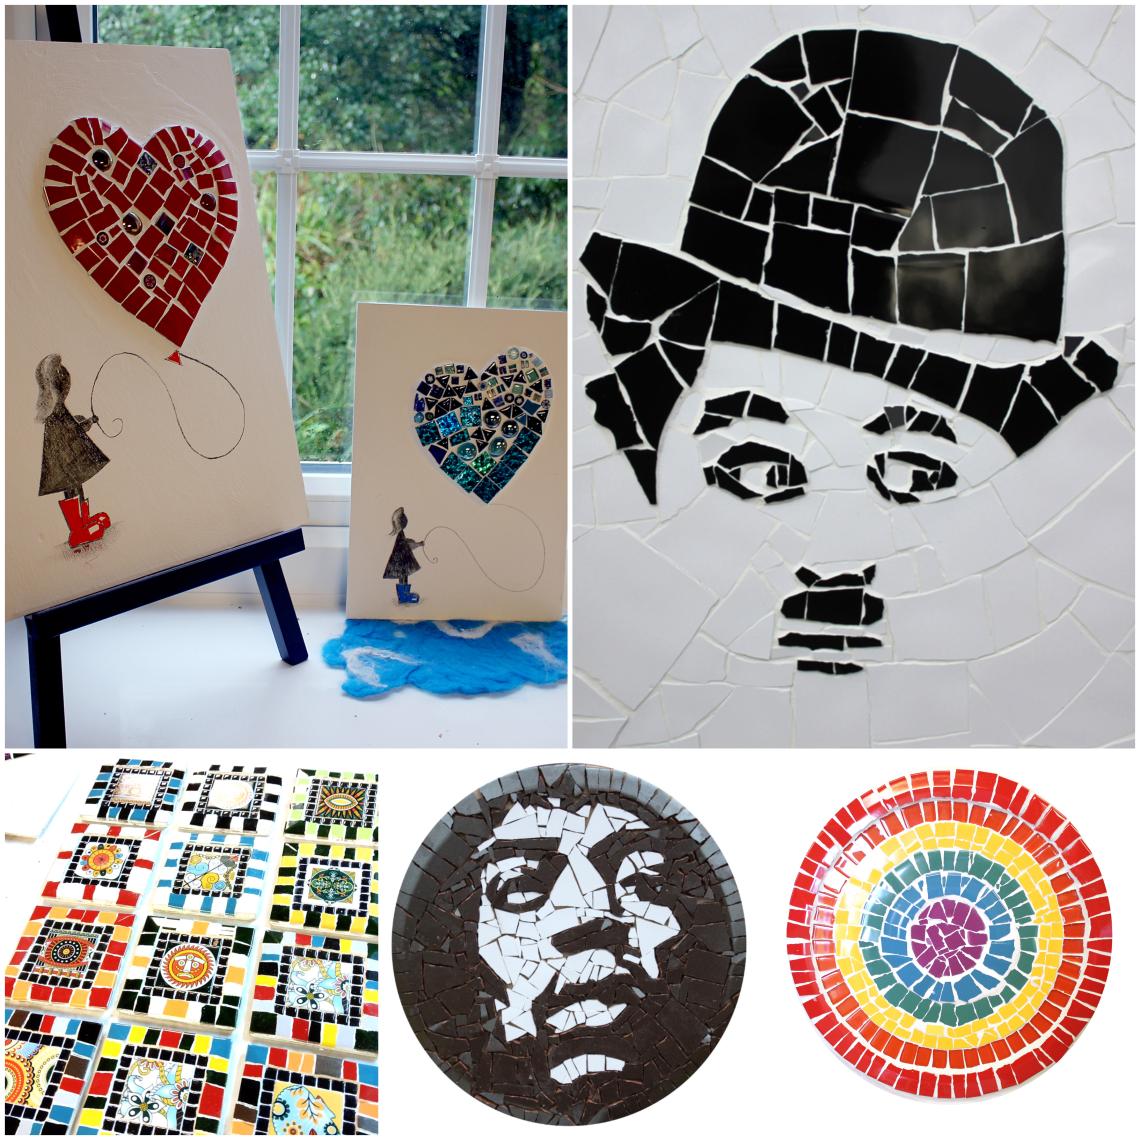 A collage of mosaics including girl with heart balloon, Charlie Chaplin, Coasters, Jimi Hendrix and a rainbow circle.